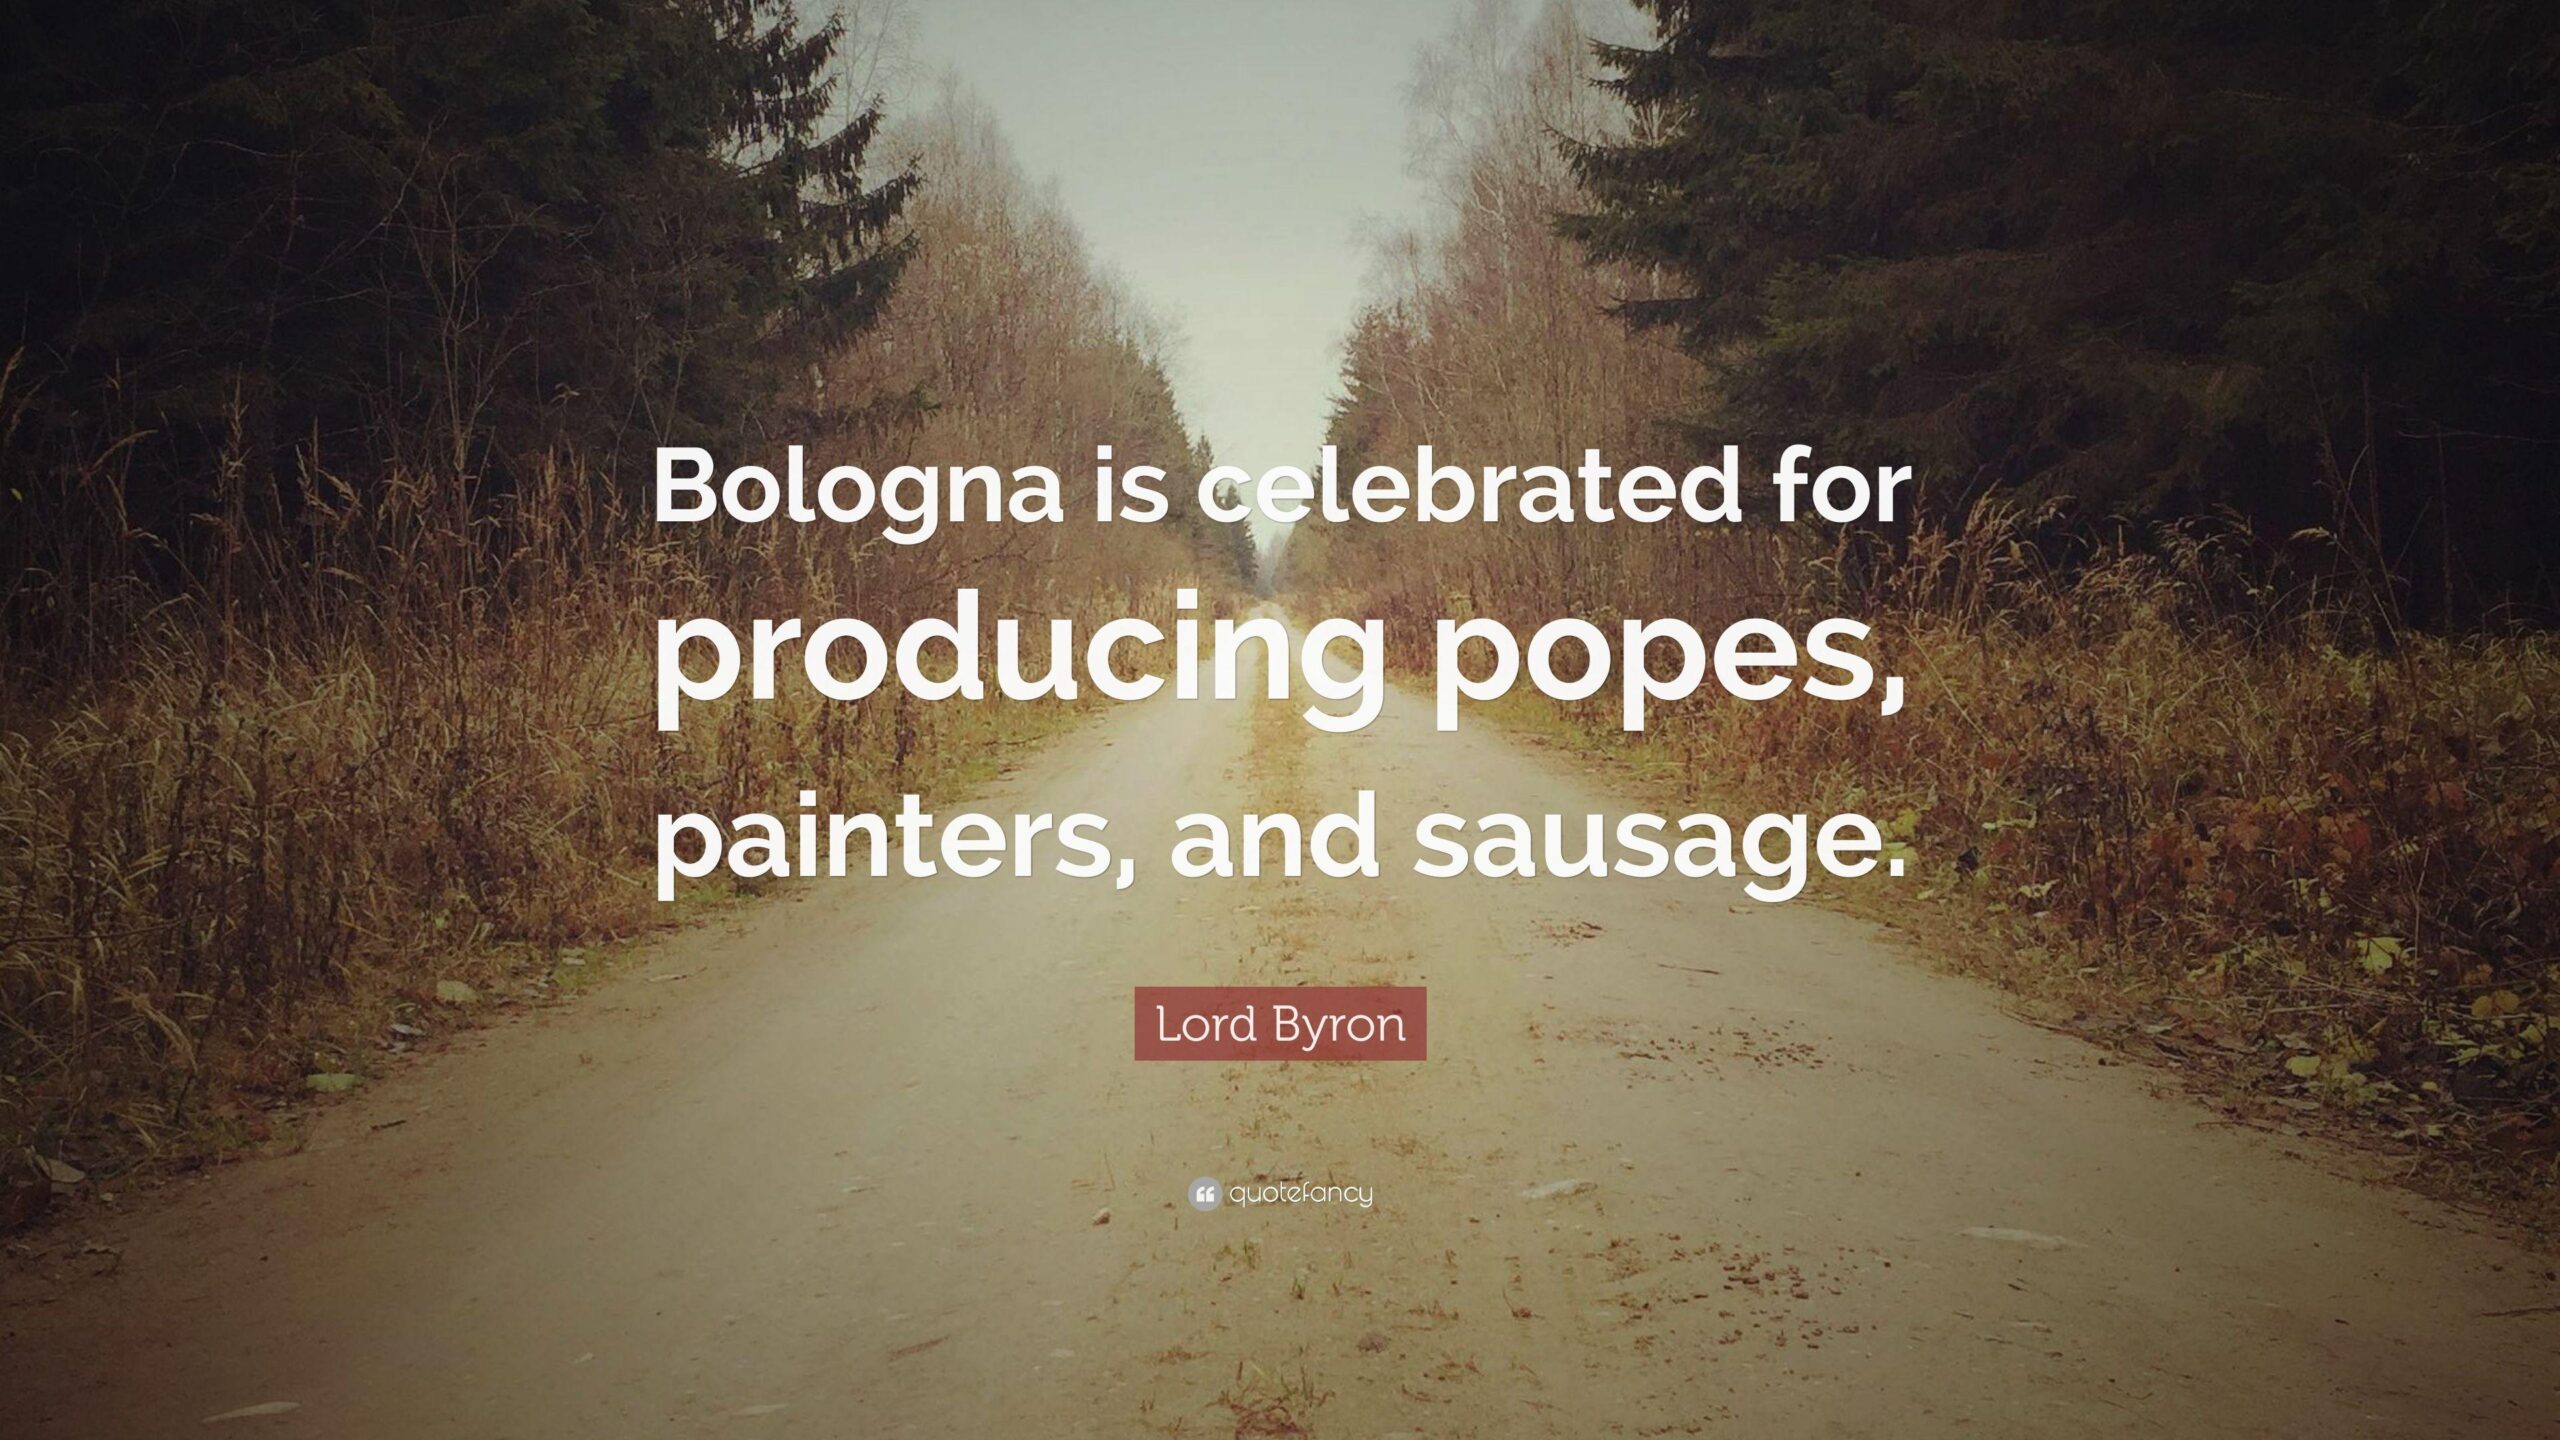 Lord Byron Quote “Bologna is celebrated for producing popes